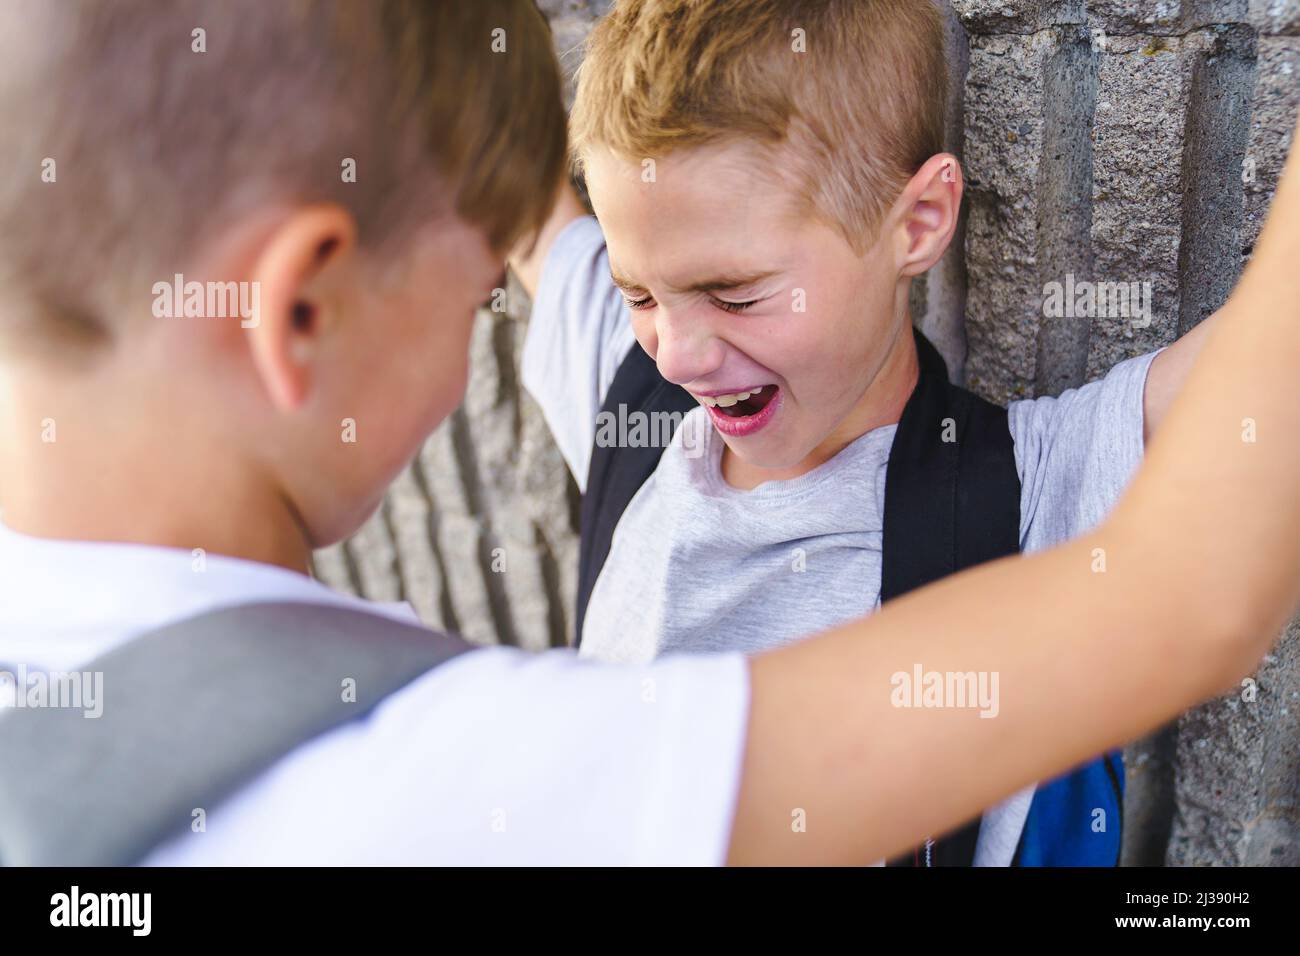 Cruel teenagers punching younger boy, physical intimidation, school bullying Stock Photo